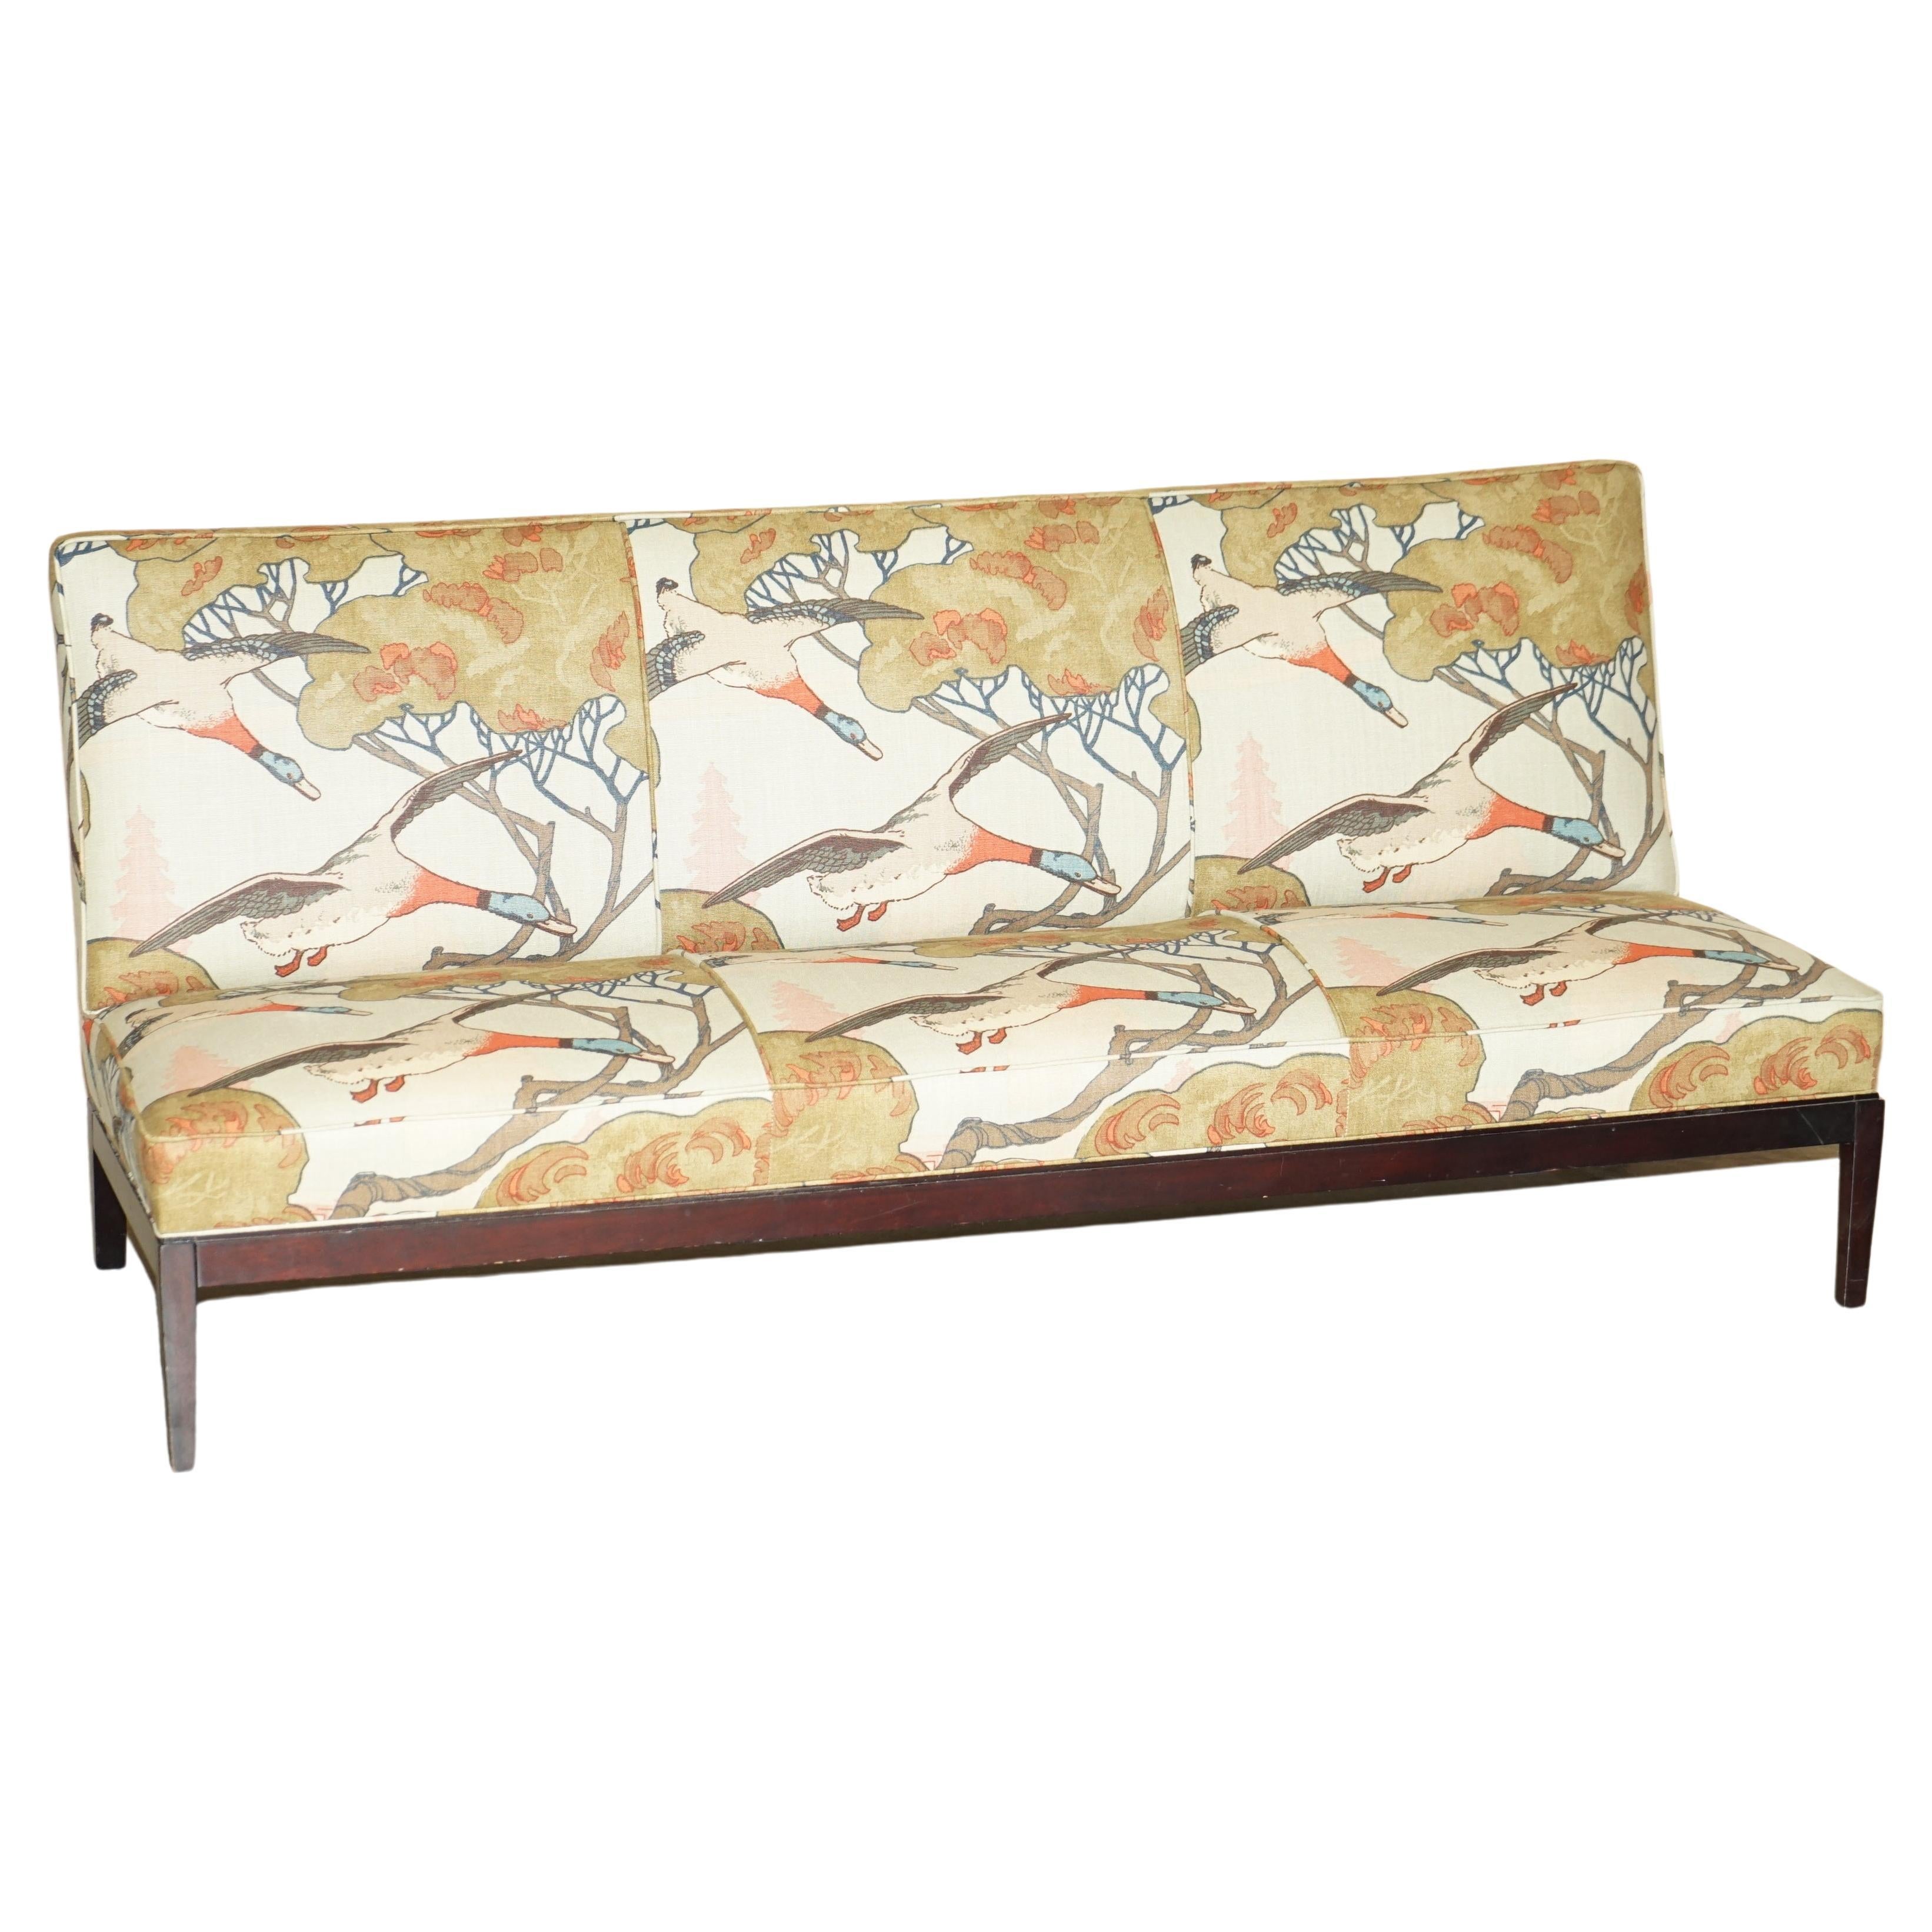 Stunning Restored George Smith Norris Three Seat Sofa in Mulberry Flying Ducks For Sale